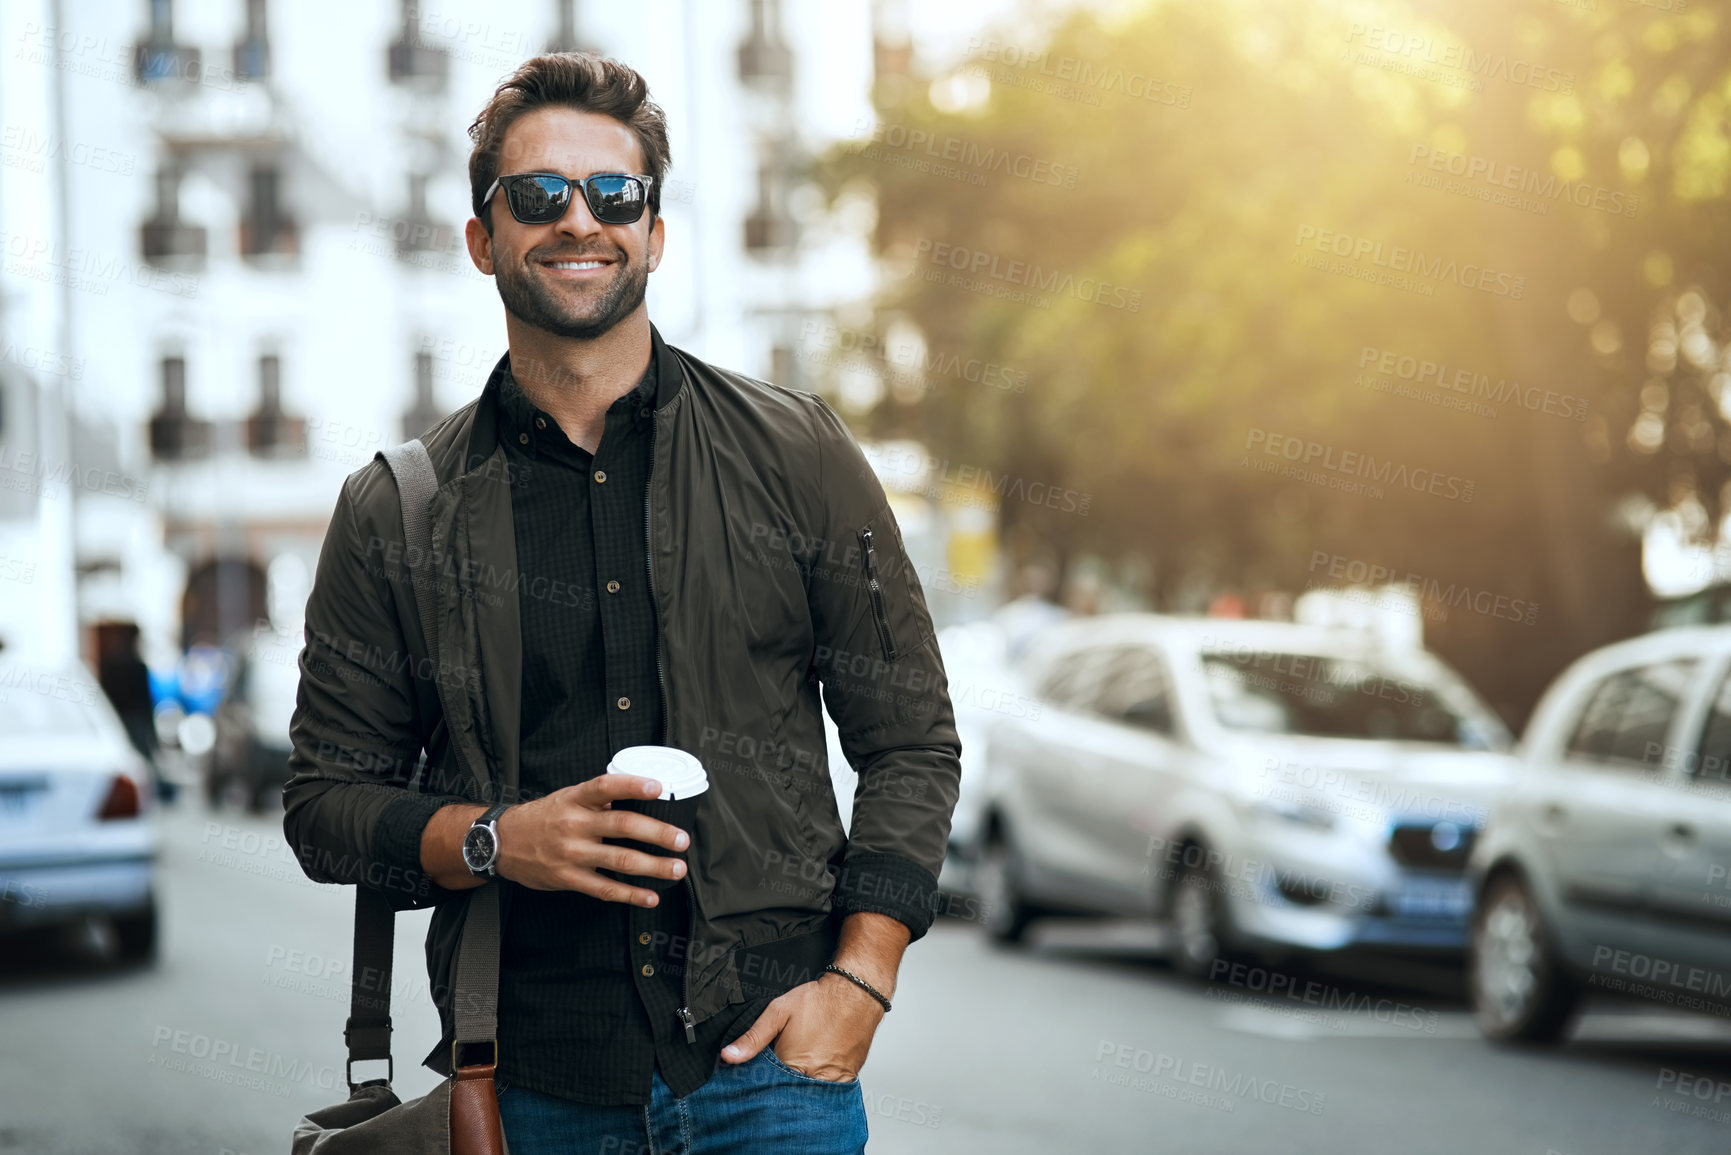 Buy stock photo Cropped shot of a handsome young man traveling through the city